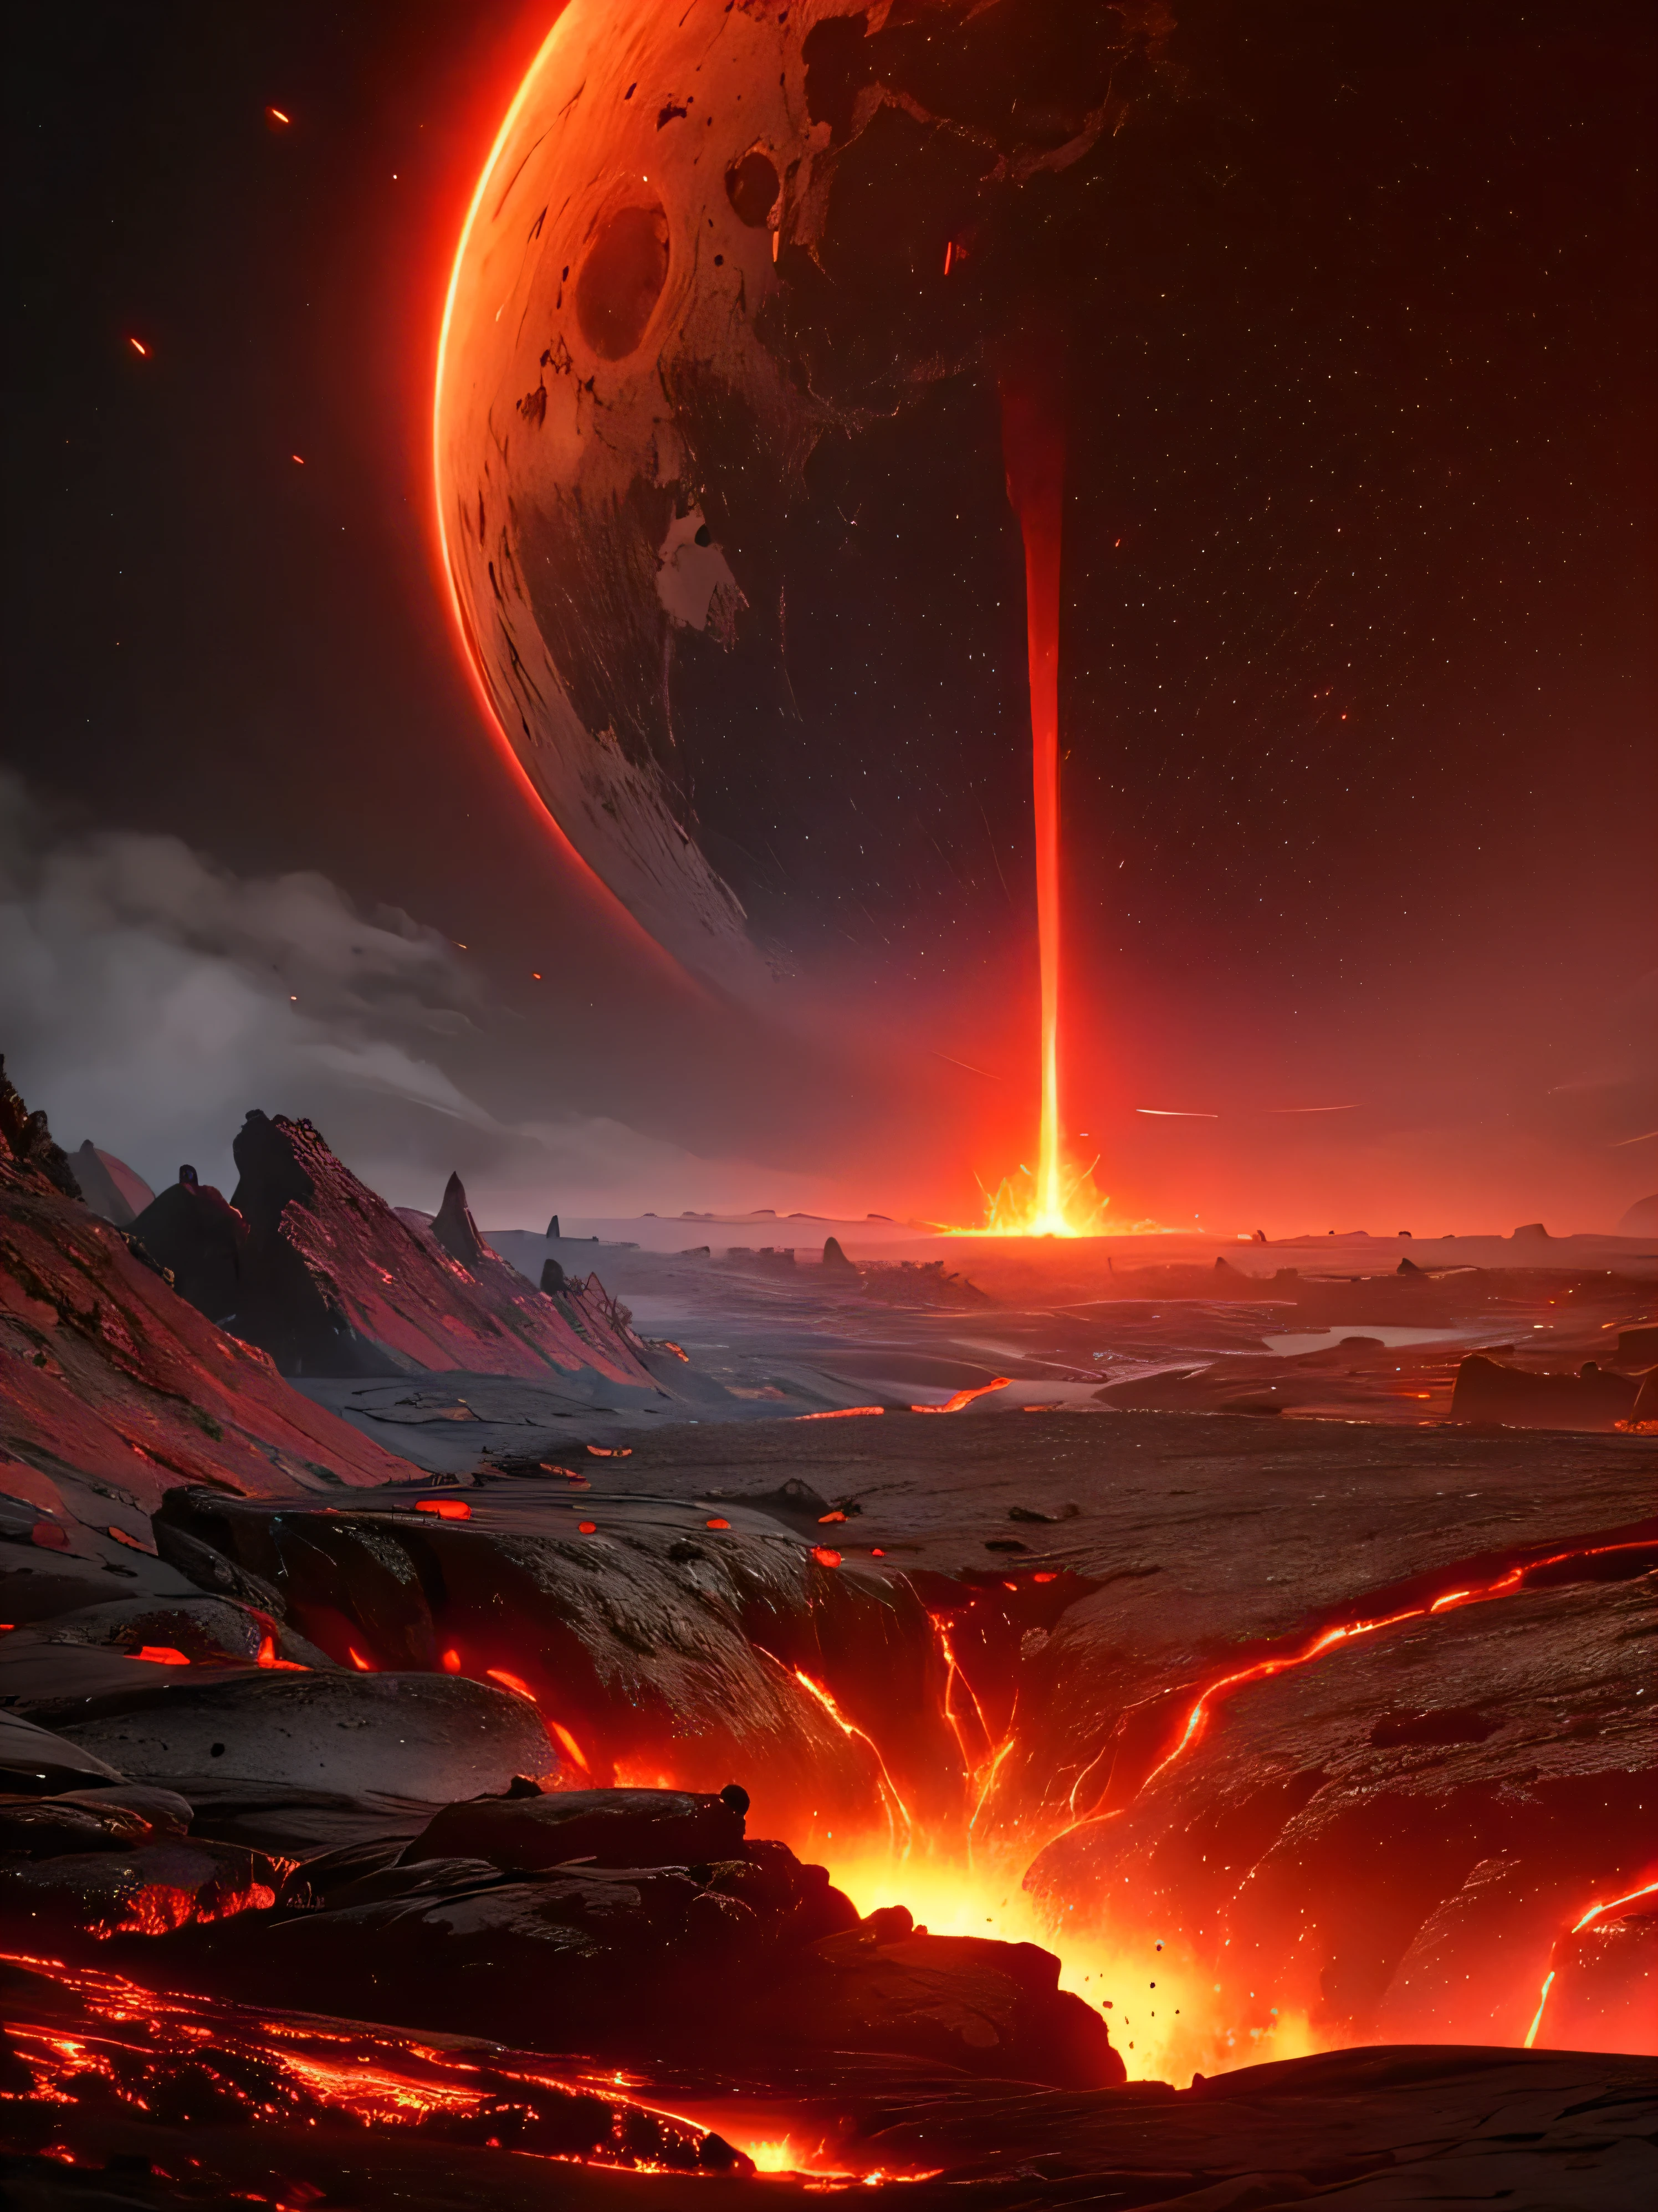 cybernetic earth with a red light inside, mechanized earth crust, the earth sprouts lava, earth's red mantle is visible, hollow earth, vtm, canyons and ridges all across earth
